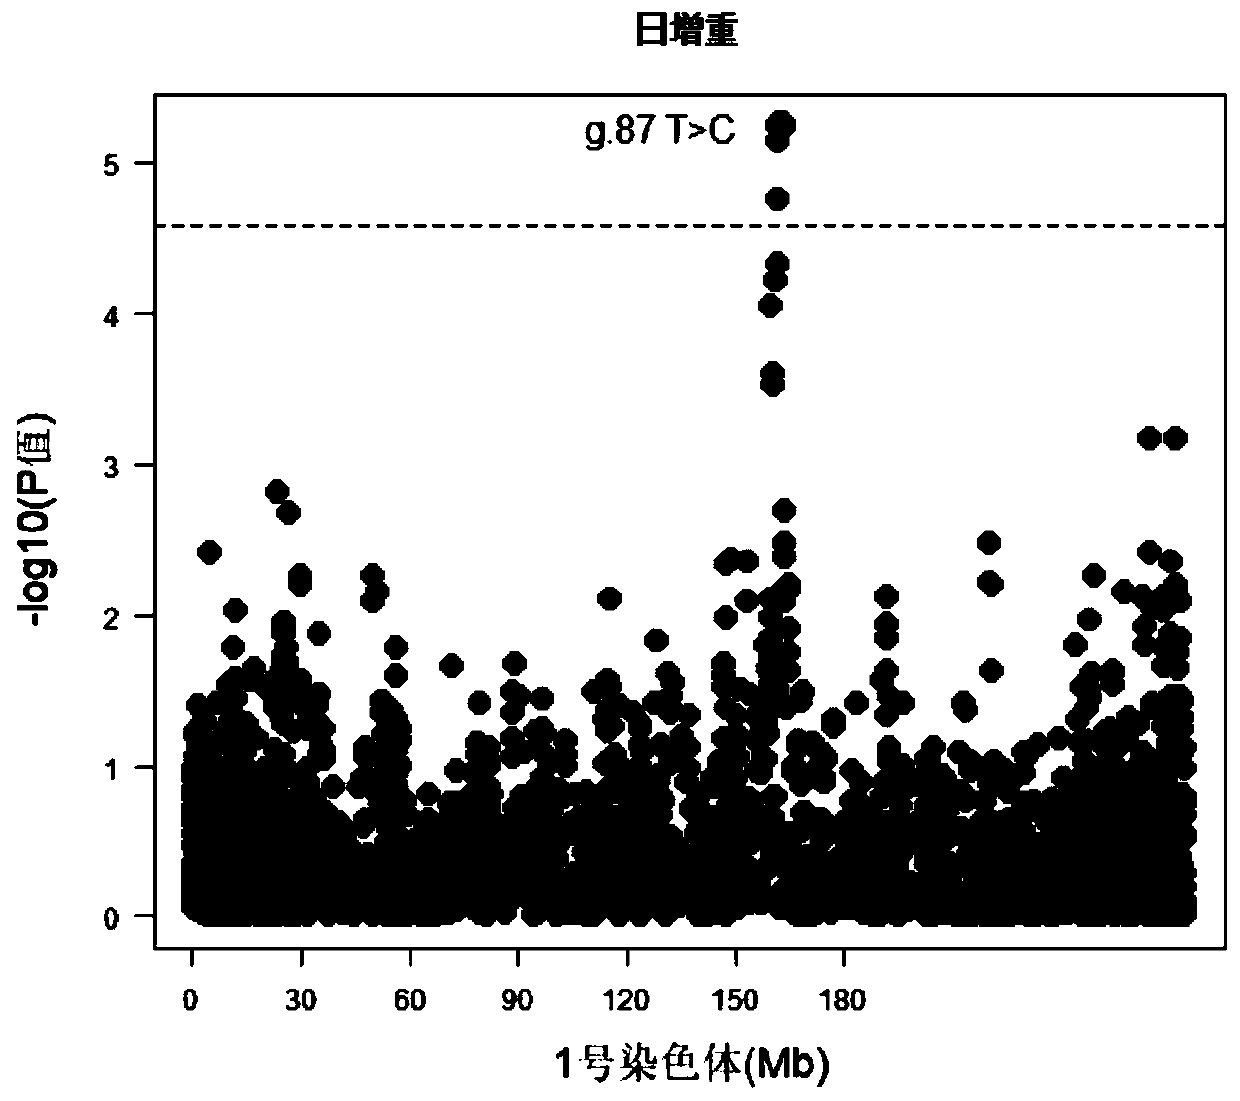 Single nucleotide polymorphisms (SNP) molecular marker located on porcine chromosome 1 and related to daily gain of pig and application of SNP molecular marker